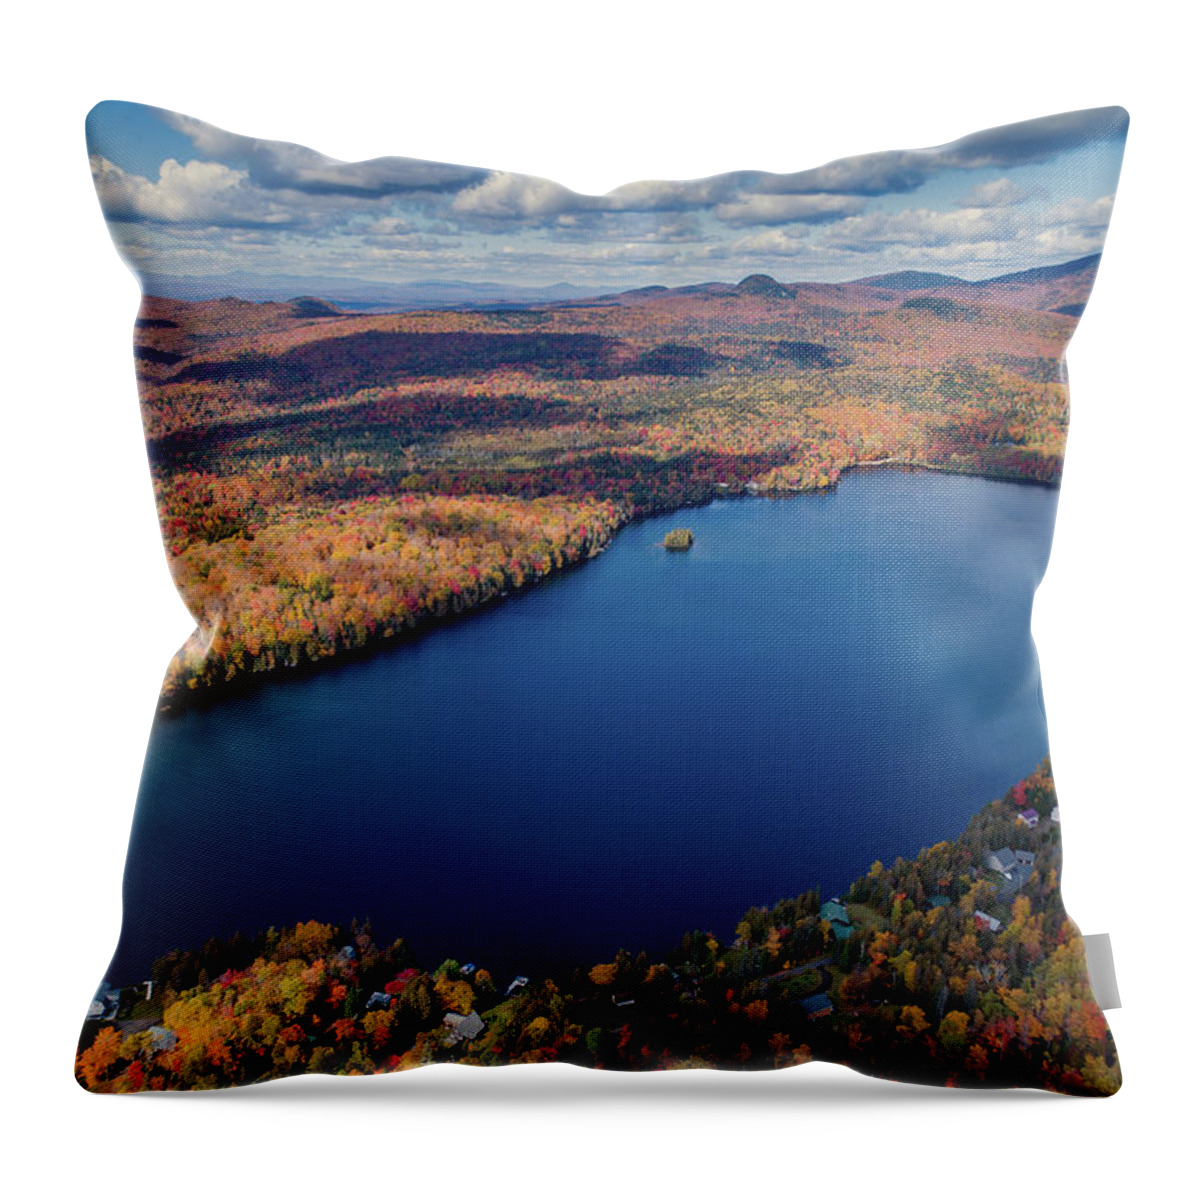 Newark Pond Throw Pillow featuring the pyrography Newark Pond, VT by John Rowe